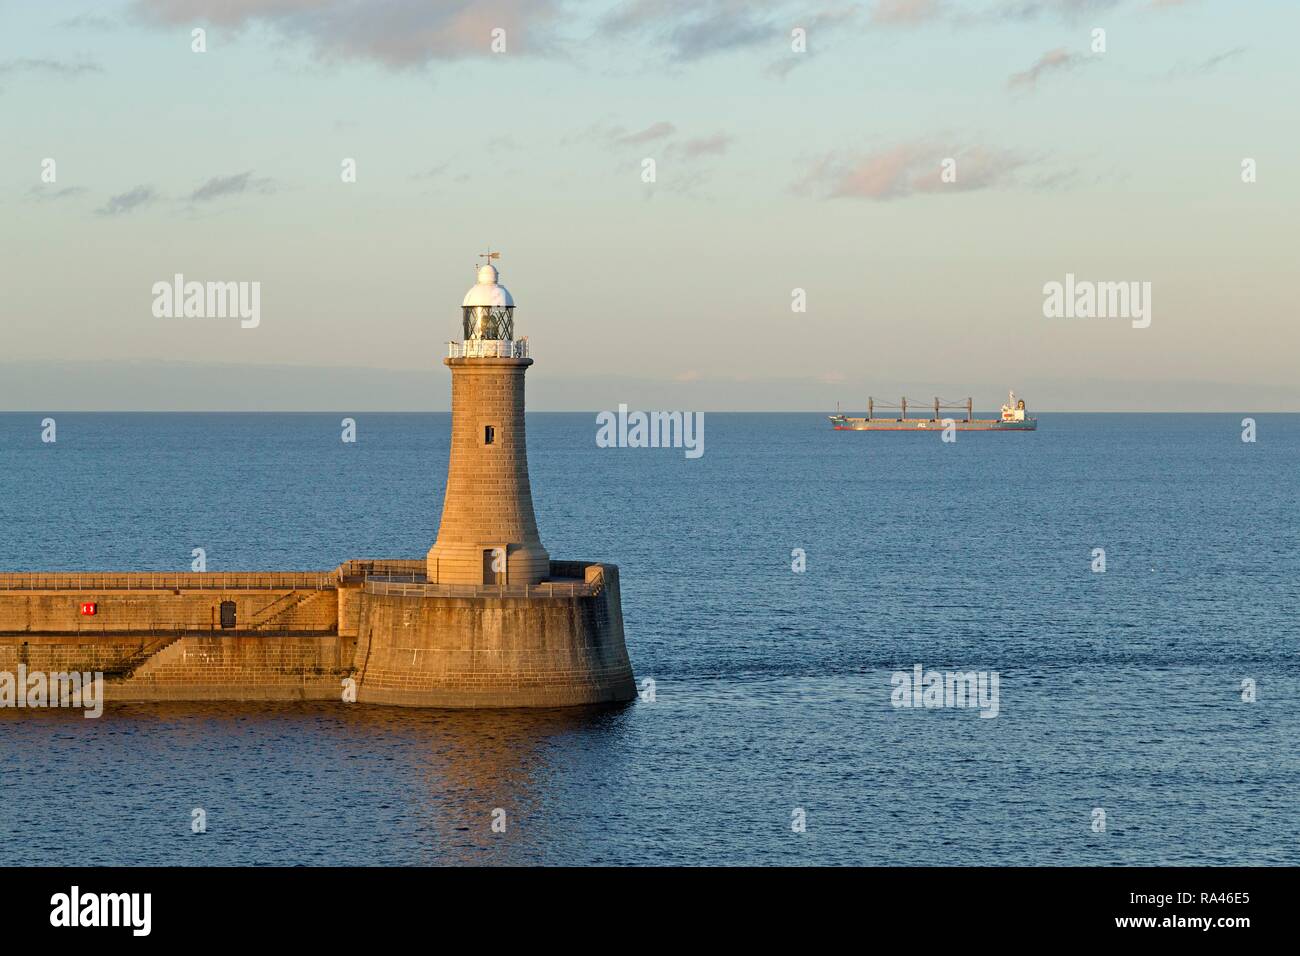 Phare, d'un cargo en mer, Tynemouth, Northumberland, Angleterre Banque D'Images